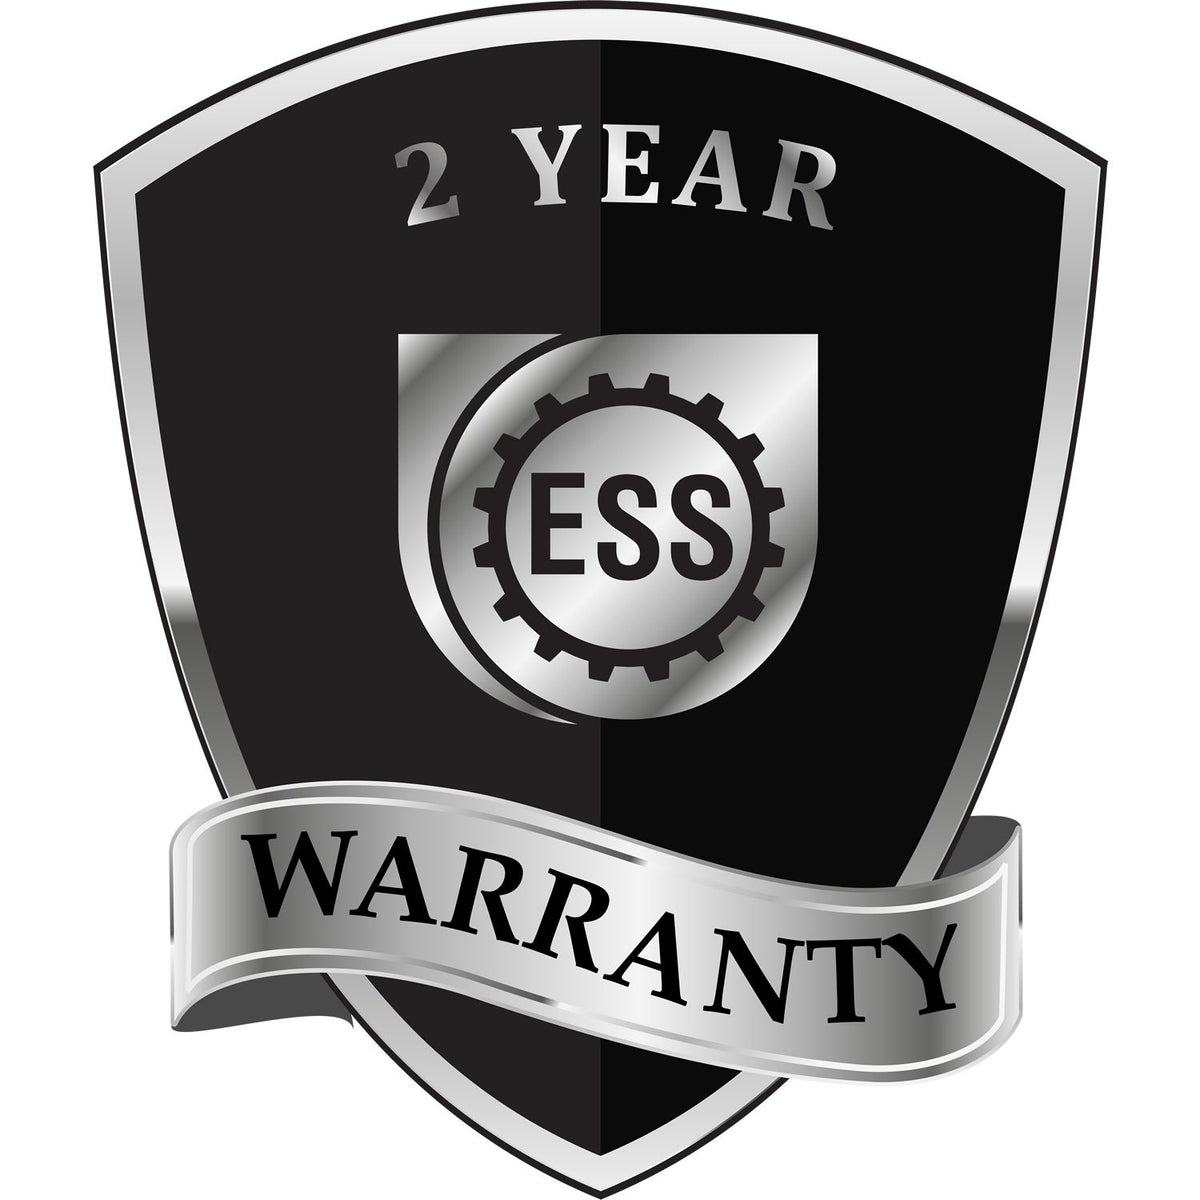 A black and silver badge or emblem showing warranty information for the Gift Arizona Landscape Architect Seal